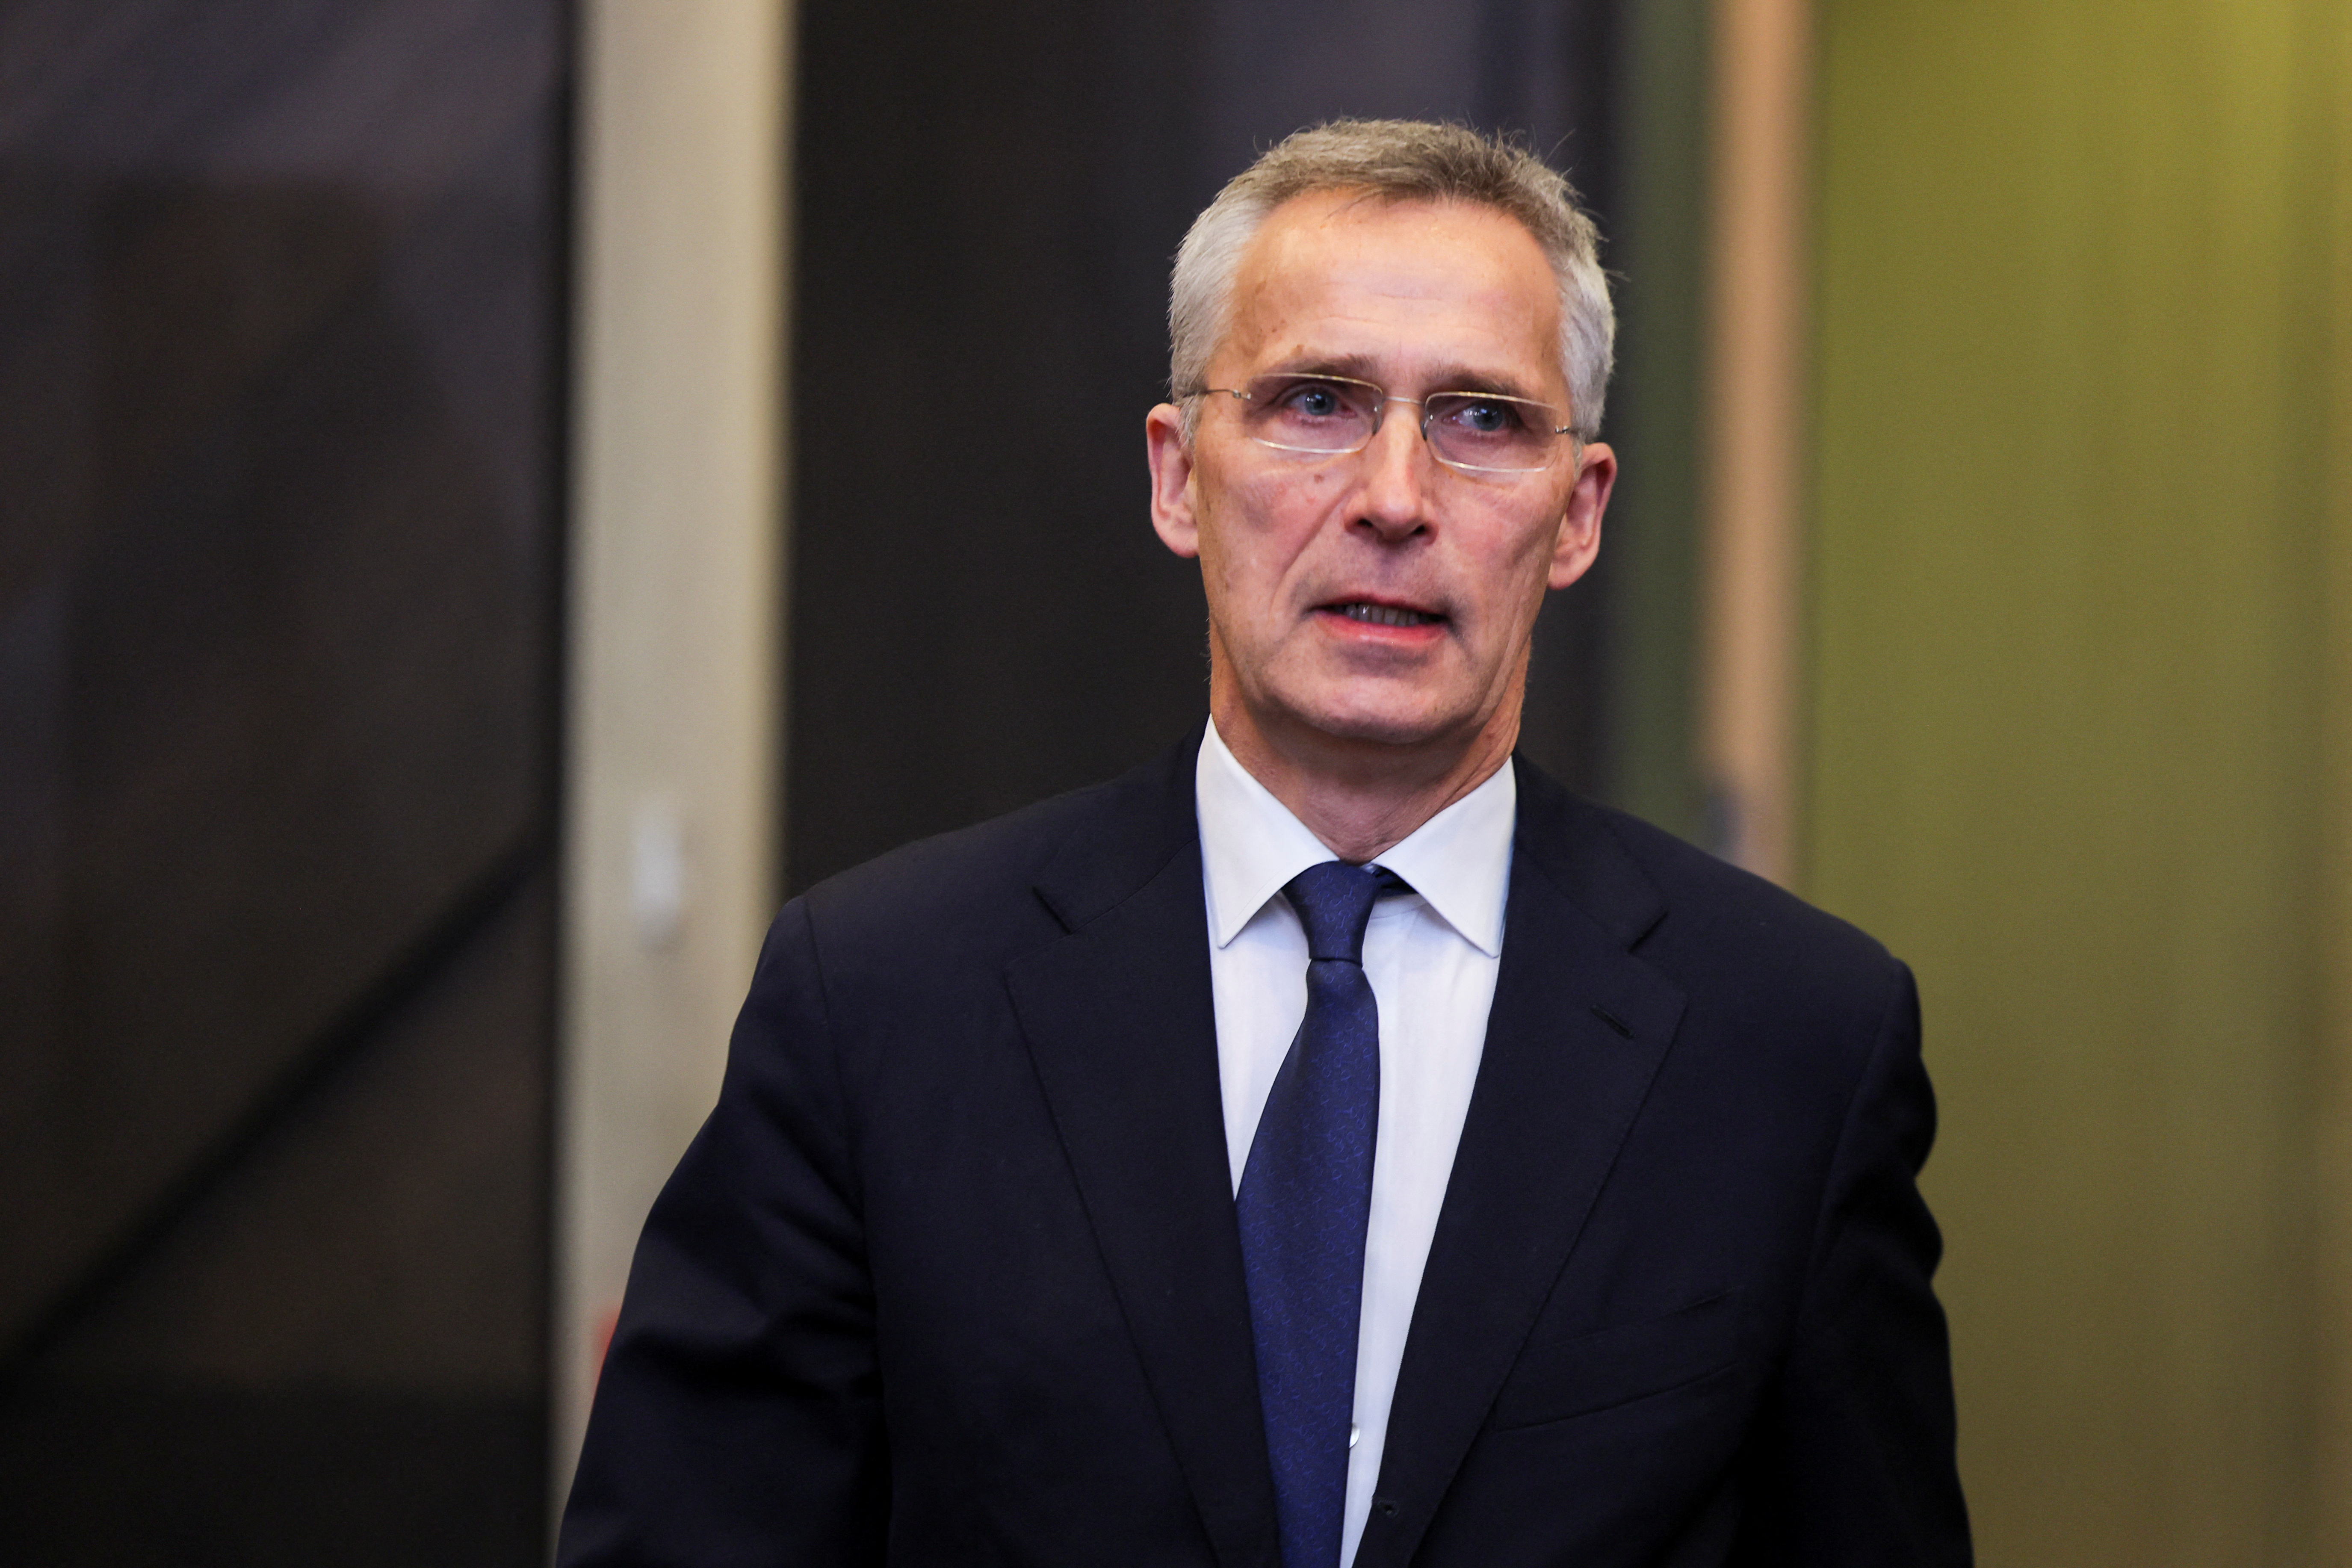 NATO foreign ministers and Ukrainian foreign minister meet in Brussels